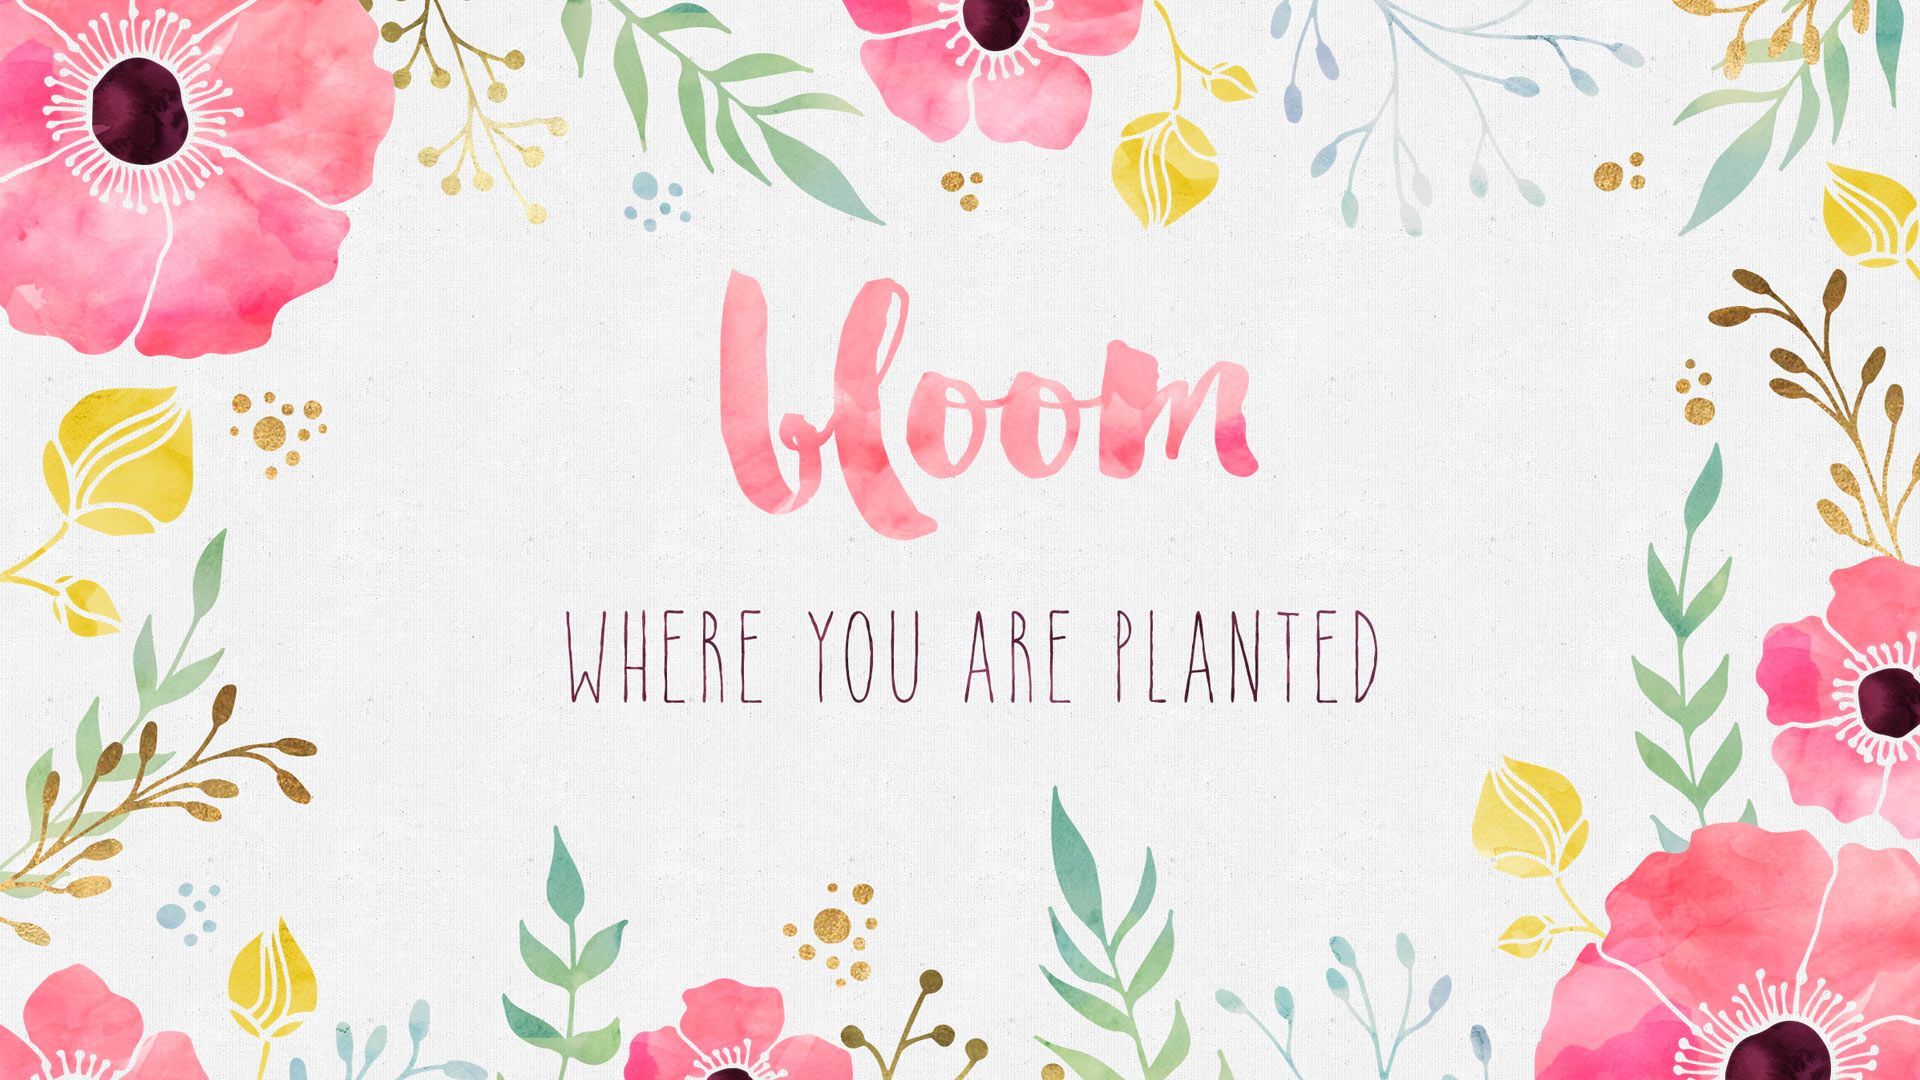 Free Desktop Wallpaper Where you are Planted. Cute